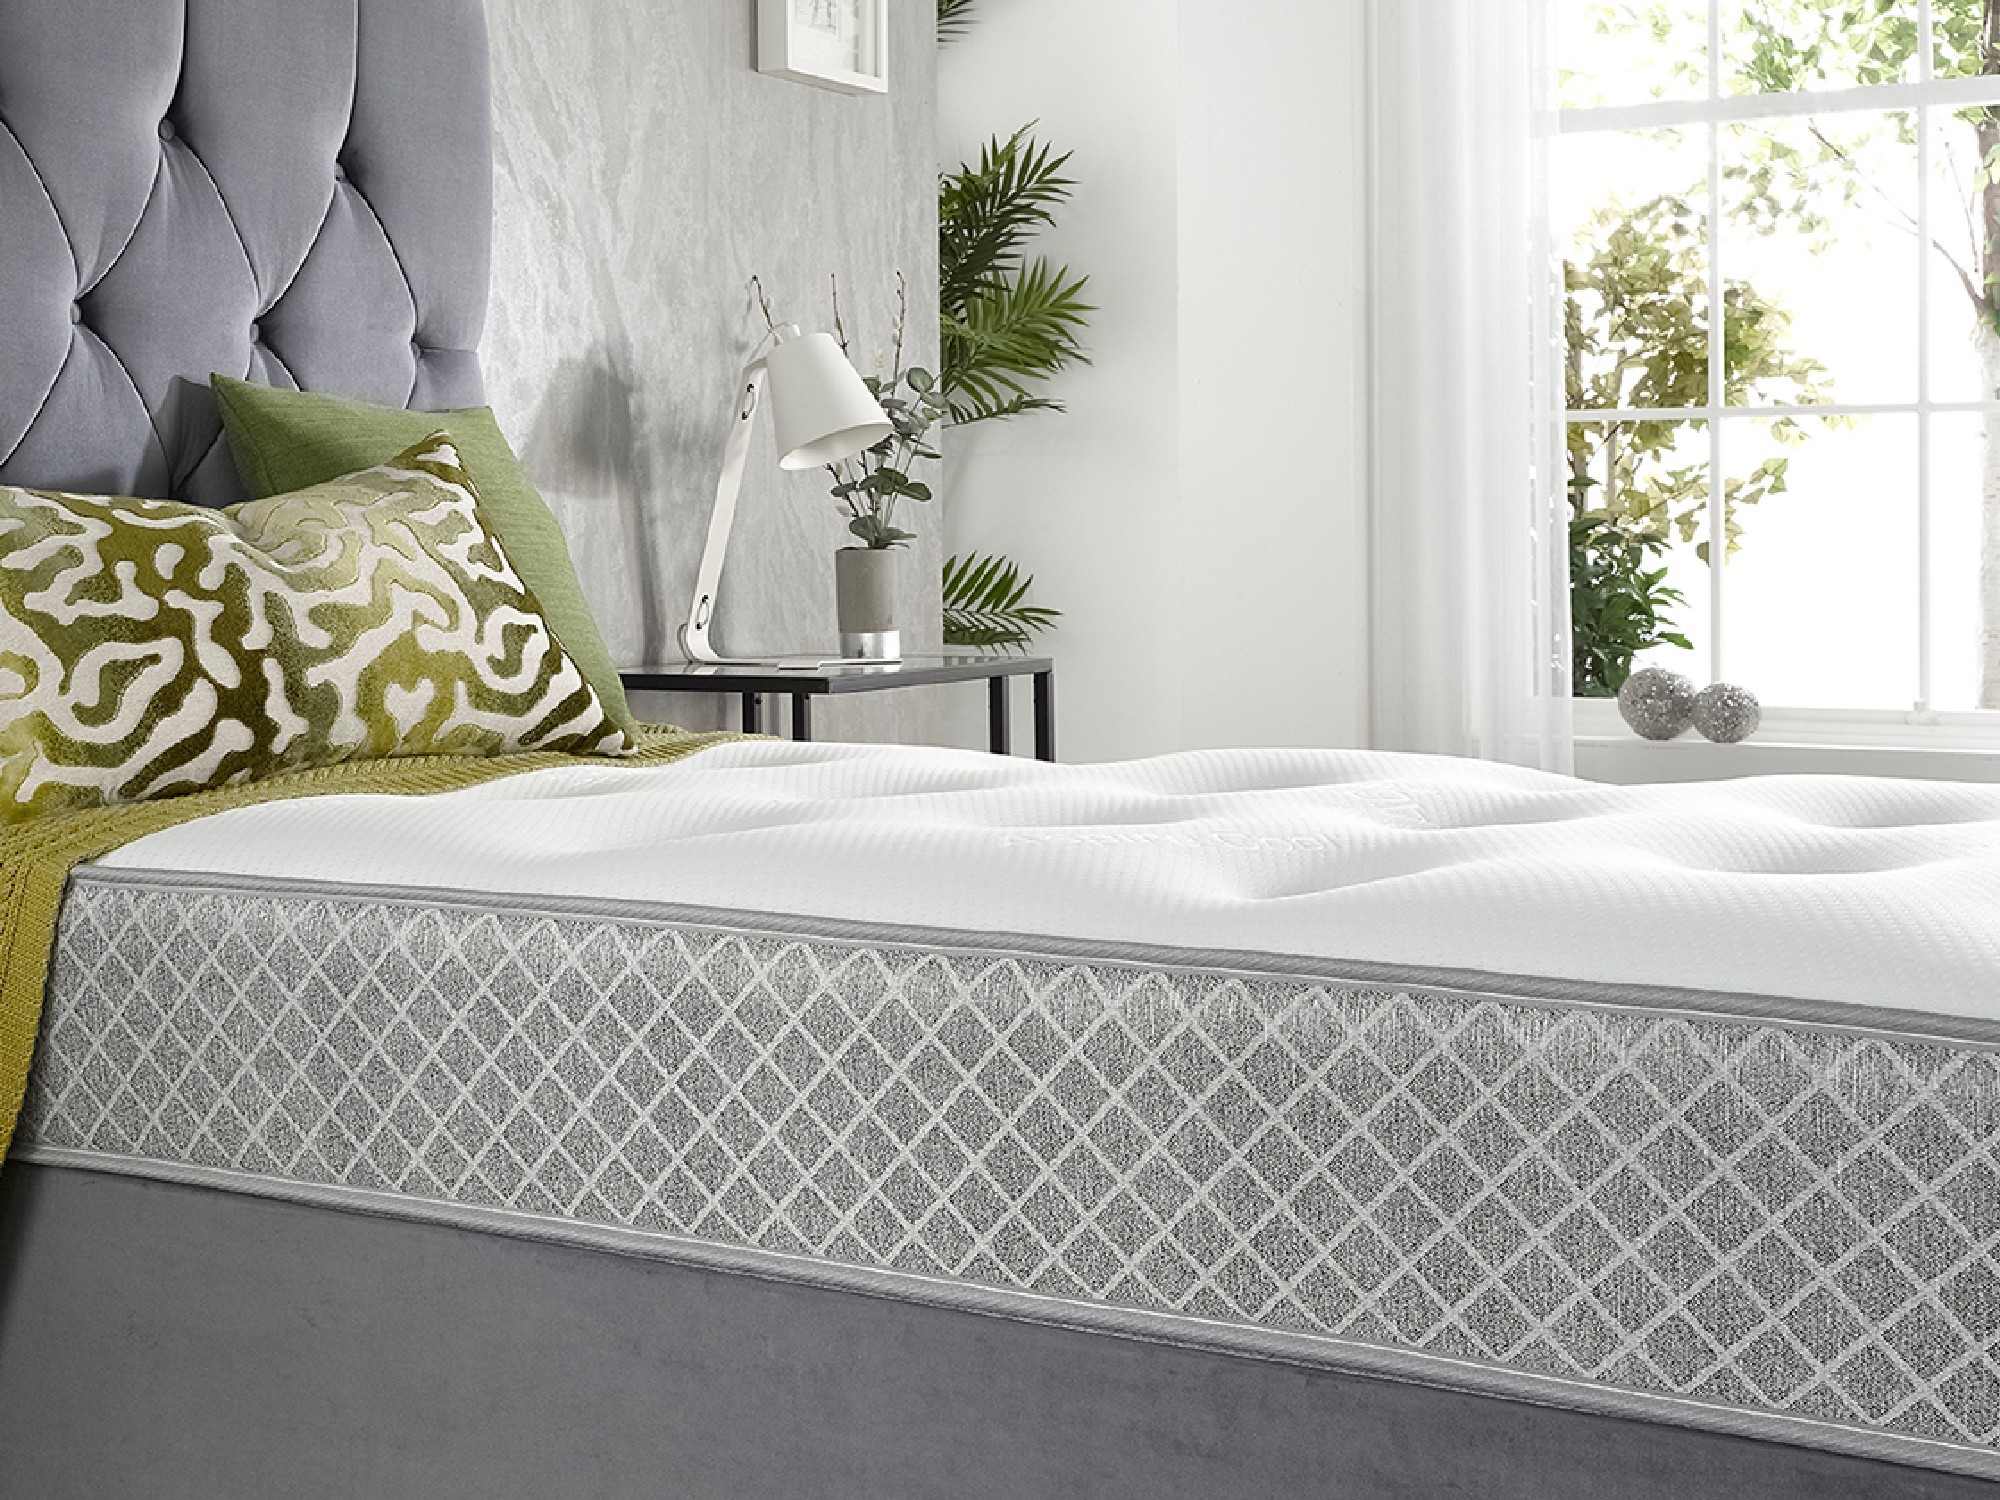 crystal ortho memory mattress payless beds